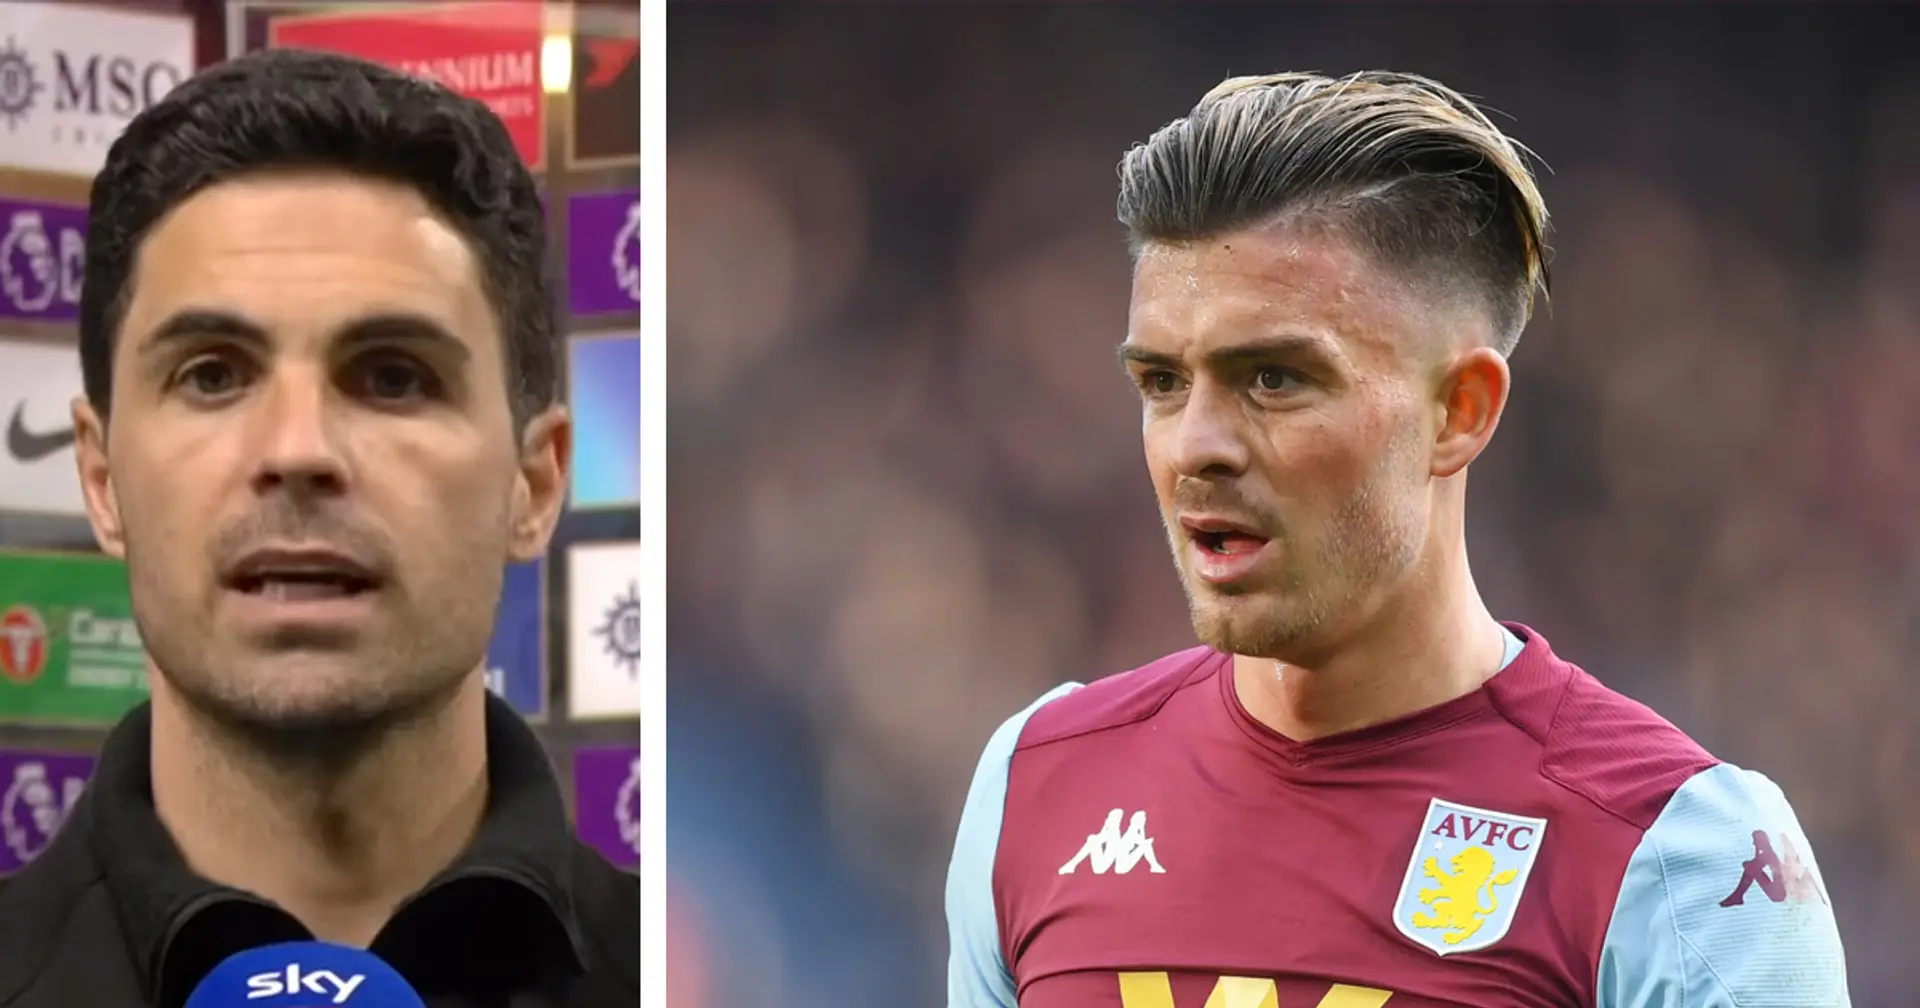 Grealish to Arsenal & 4 other transfer rumours you should believe the least now